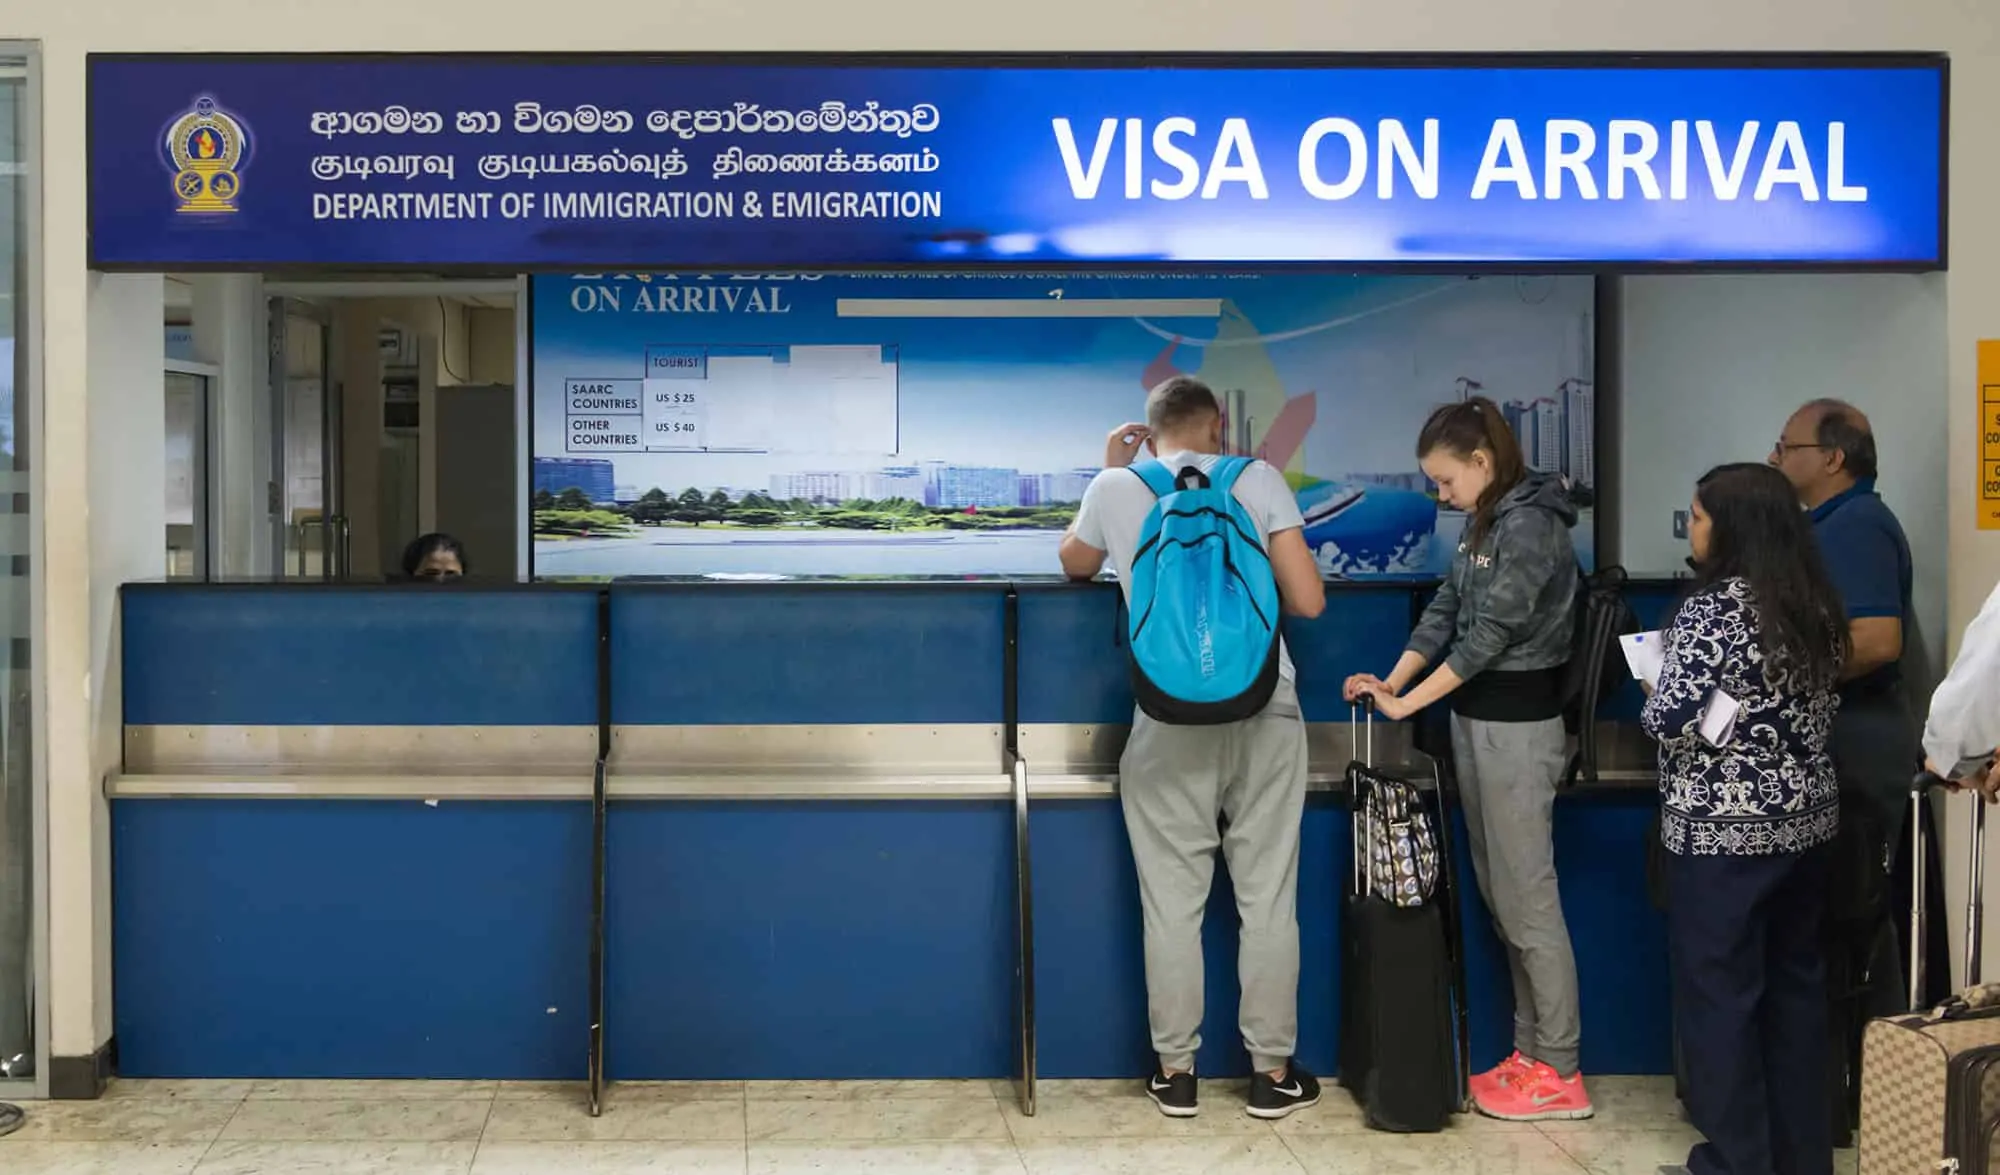 What is Visa on Arrival and how to get it successfully